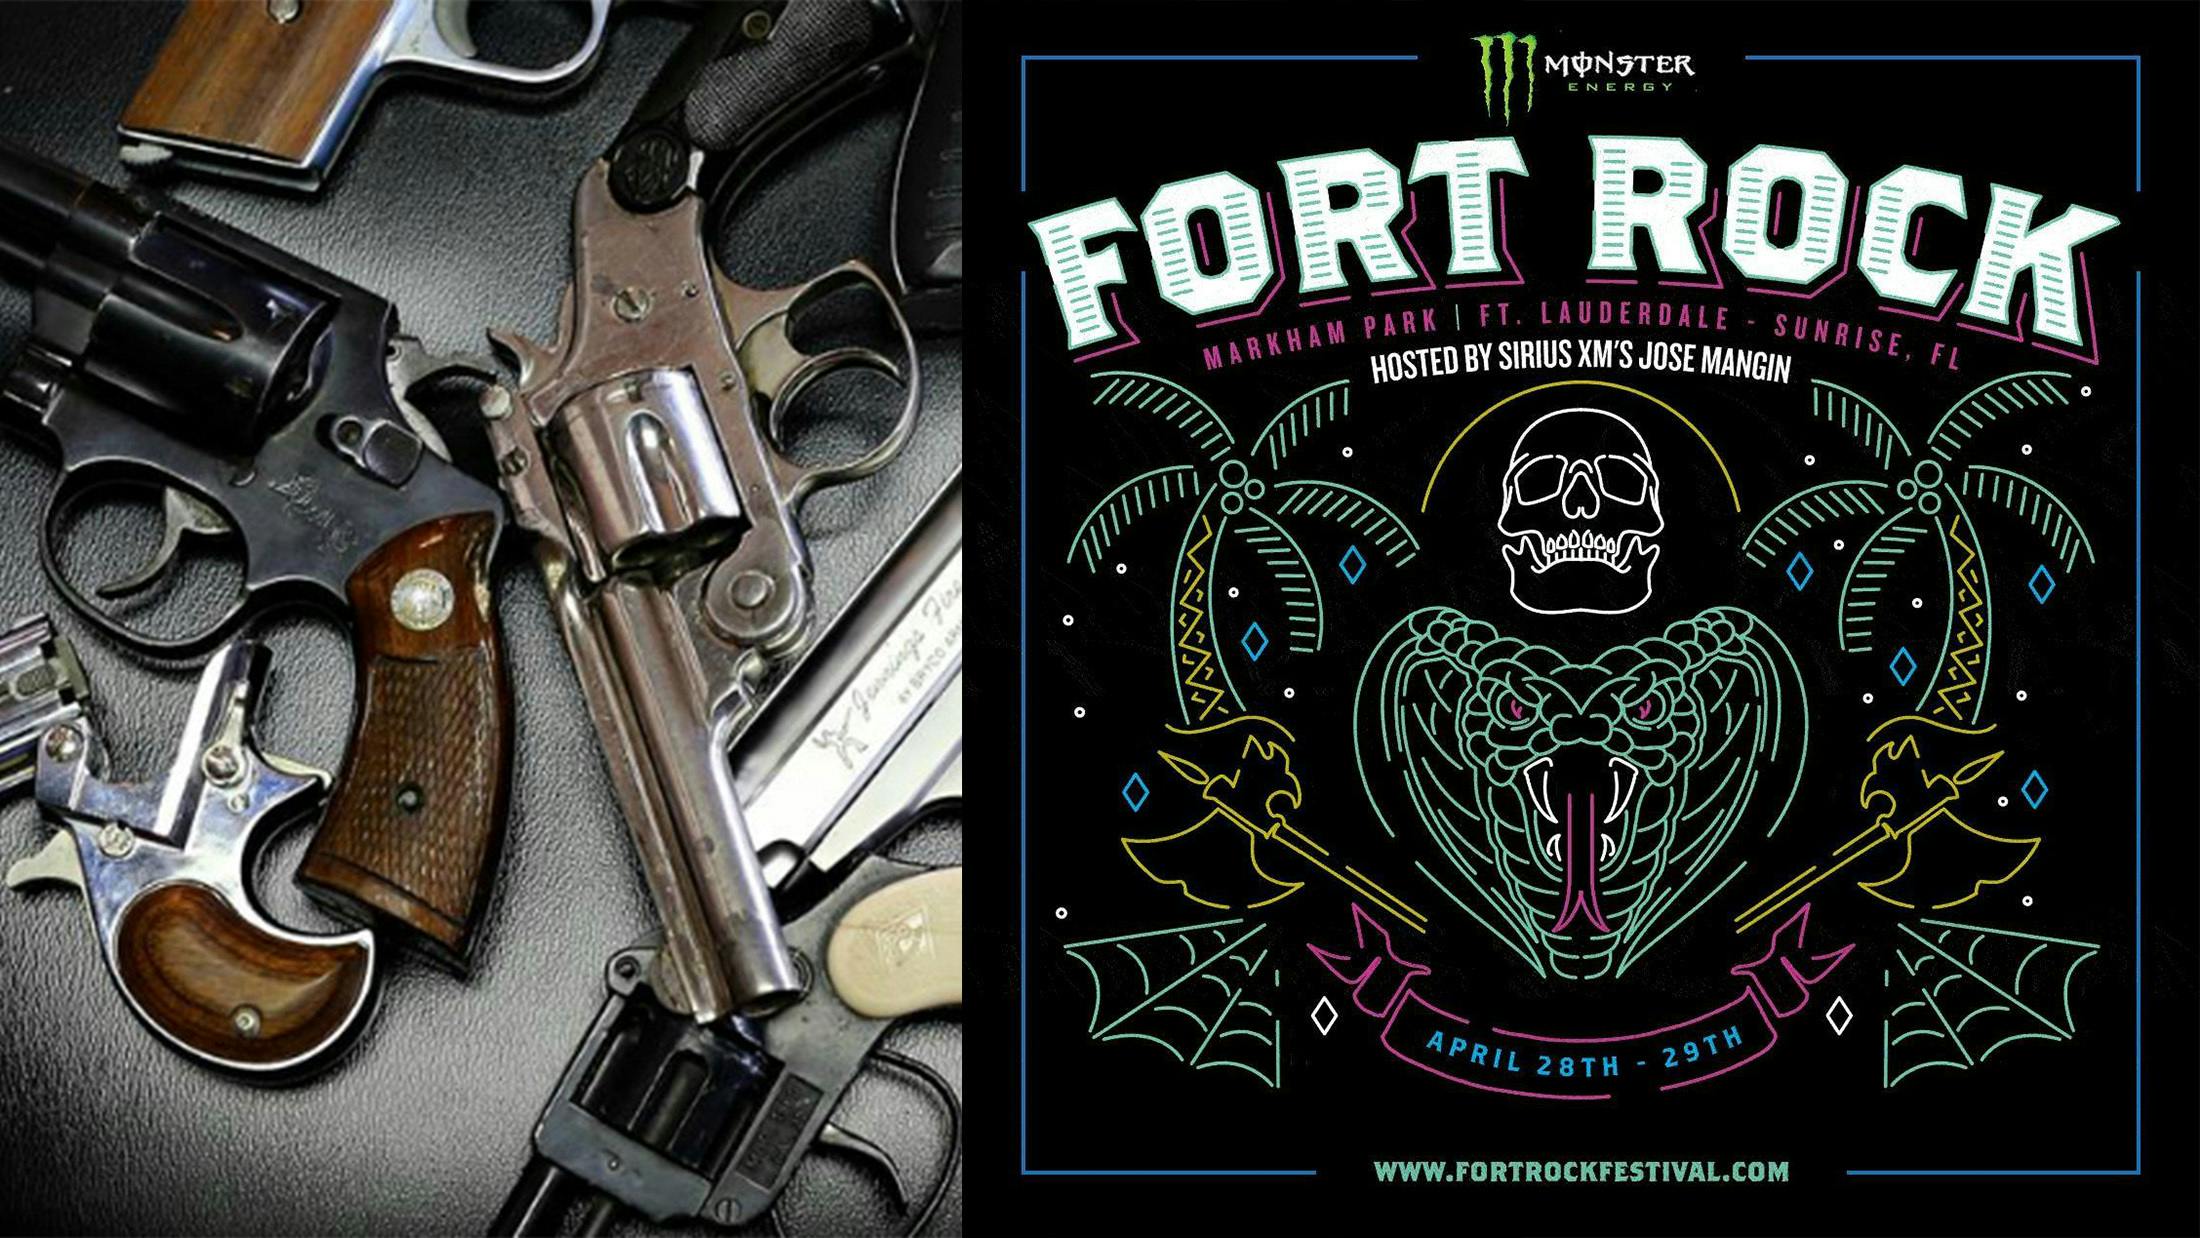 Fort Rock Fest To Give 50% Discount To Those Who Sign Gun Control Petition